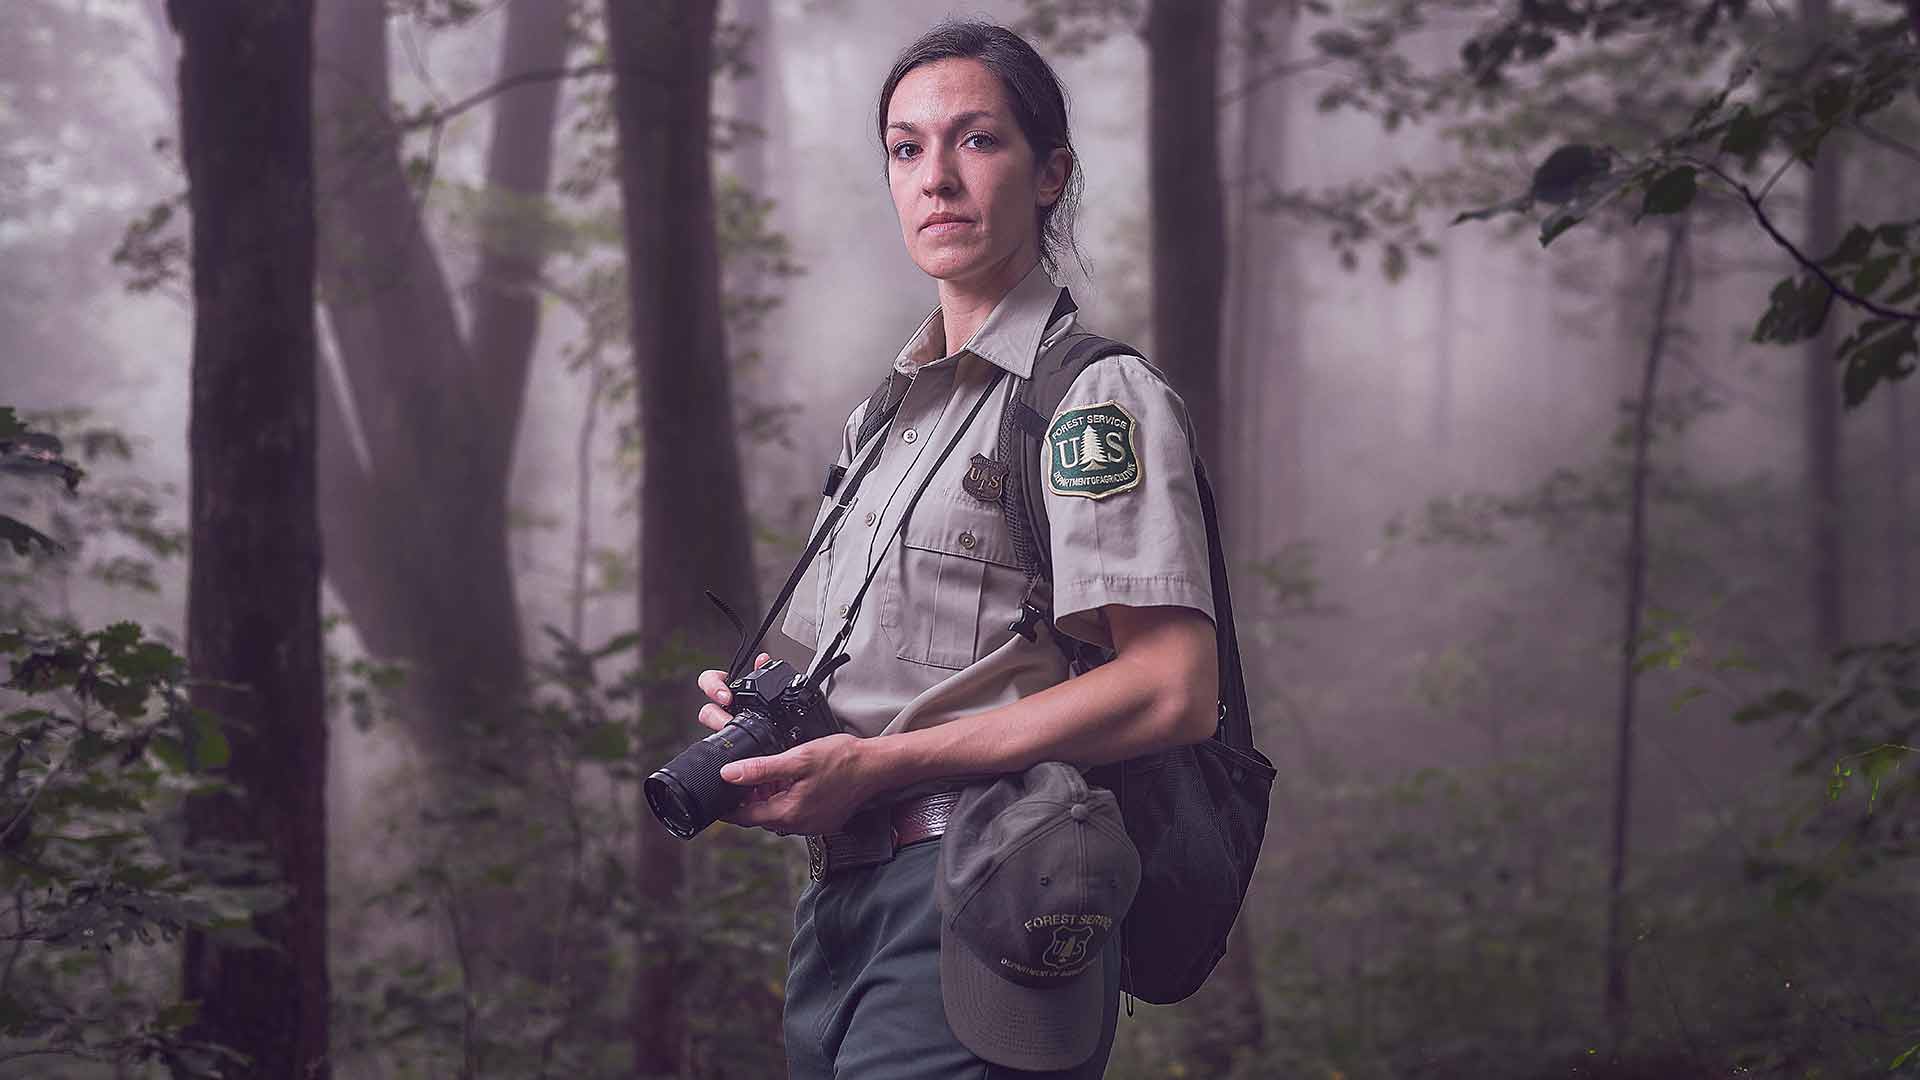 US Navy photographer and mass communications specialist Kathleen Gorby in forest service uniform with camera at the ready.